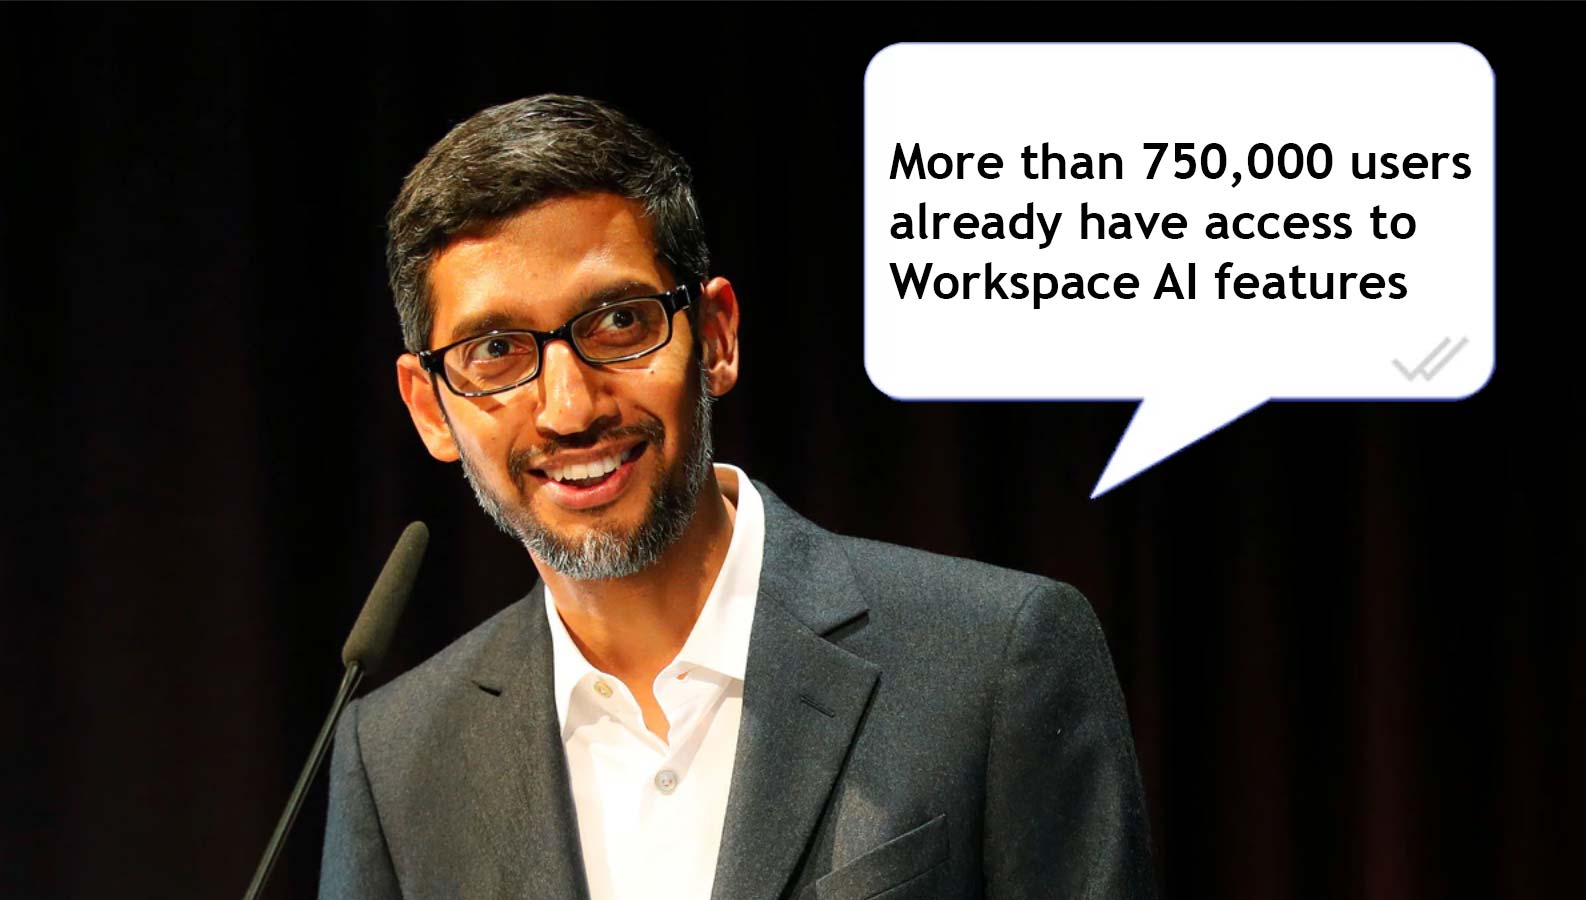 Google CEO : More than 750,000 users already have access to Workspace AI features